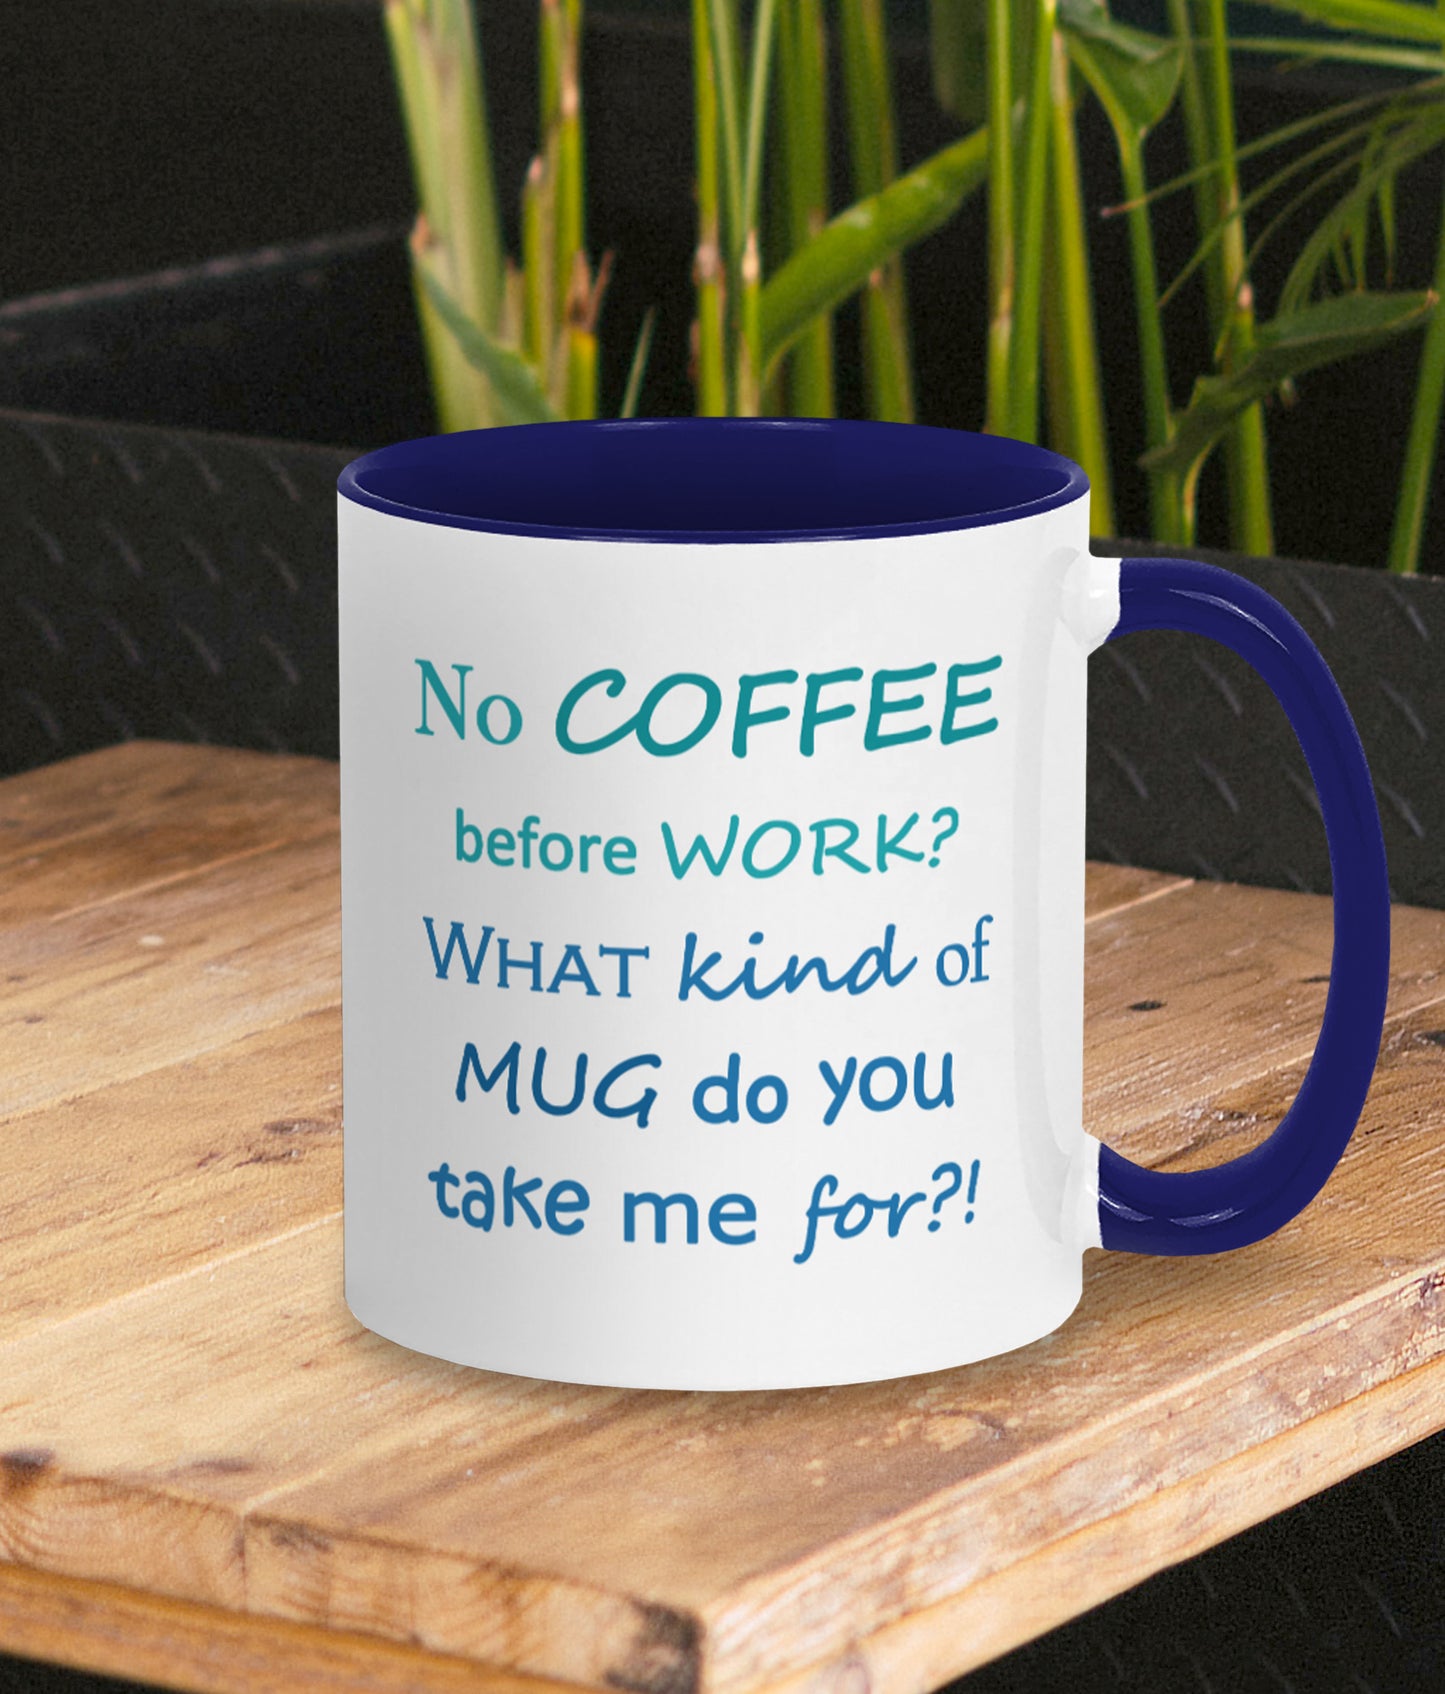 Hilarious mug for work friend. Gift for coffee lover.  White mug with navy blue inner and handle. Two tone blue text on mug reads humorous words No COFFEE before WORK? WHAT kind of MUG do you take me for?!